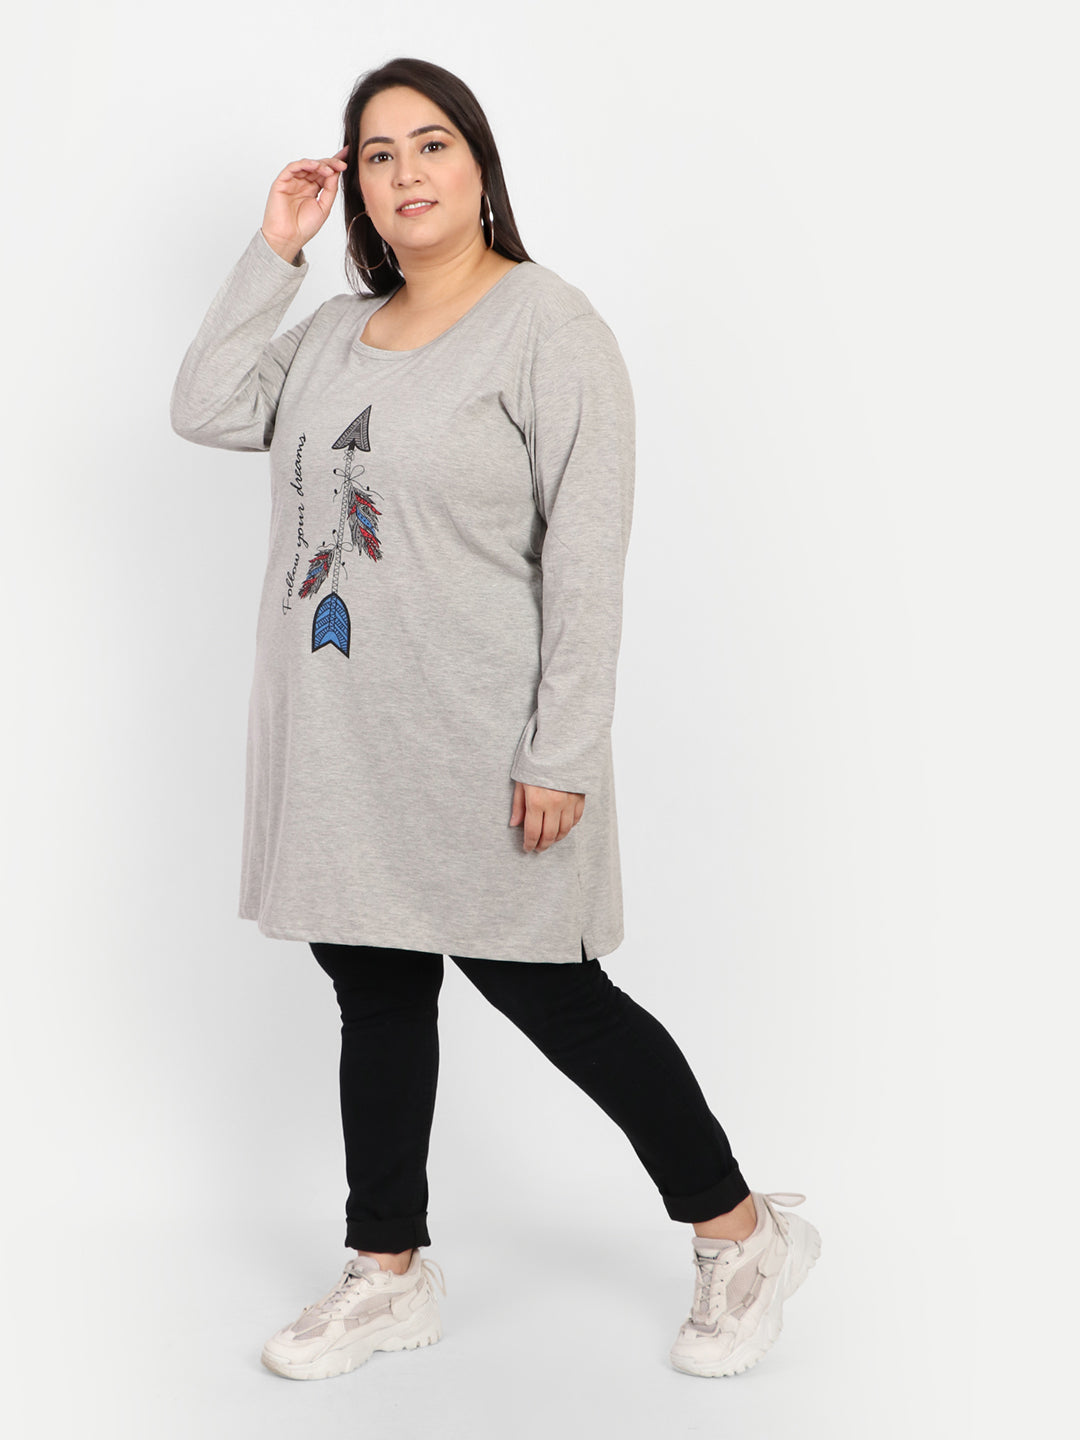 Plus Size Cotton Long Tops for Women Full Sleeves - Pack of 2 (Wine & Grey)